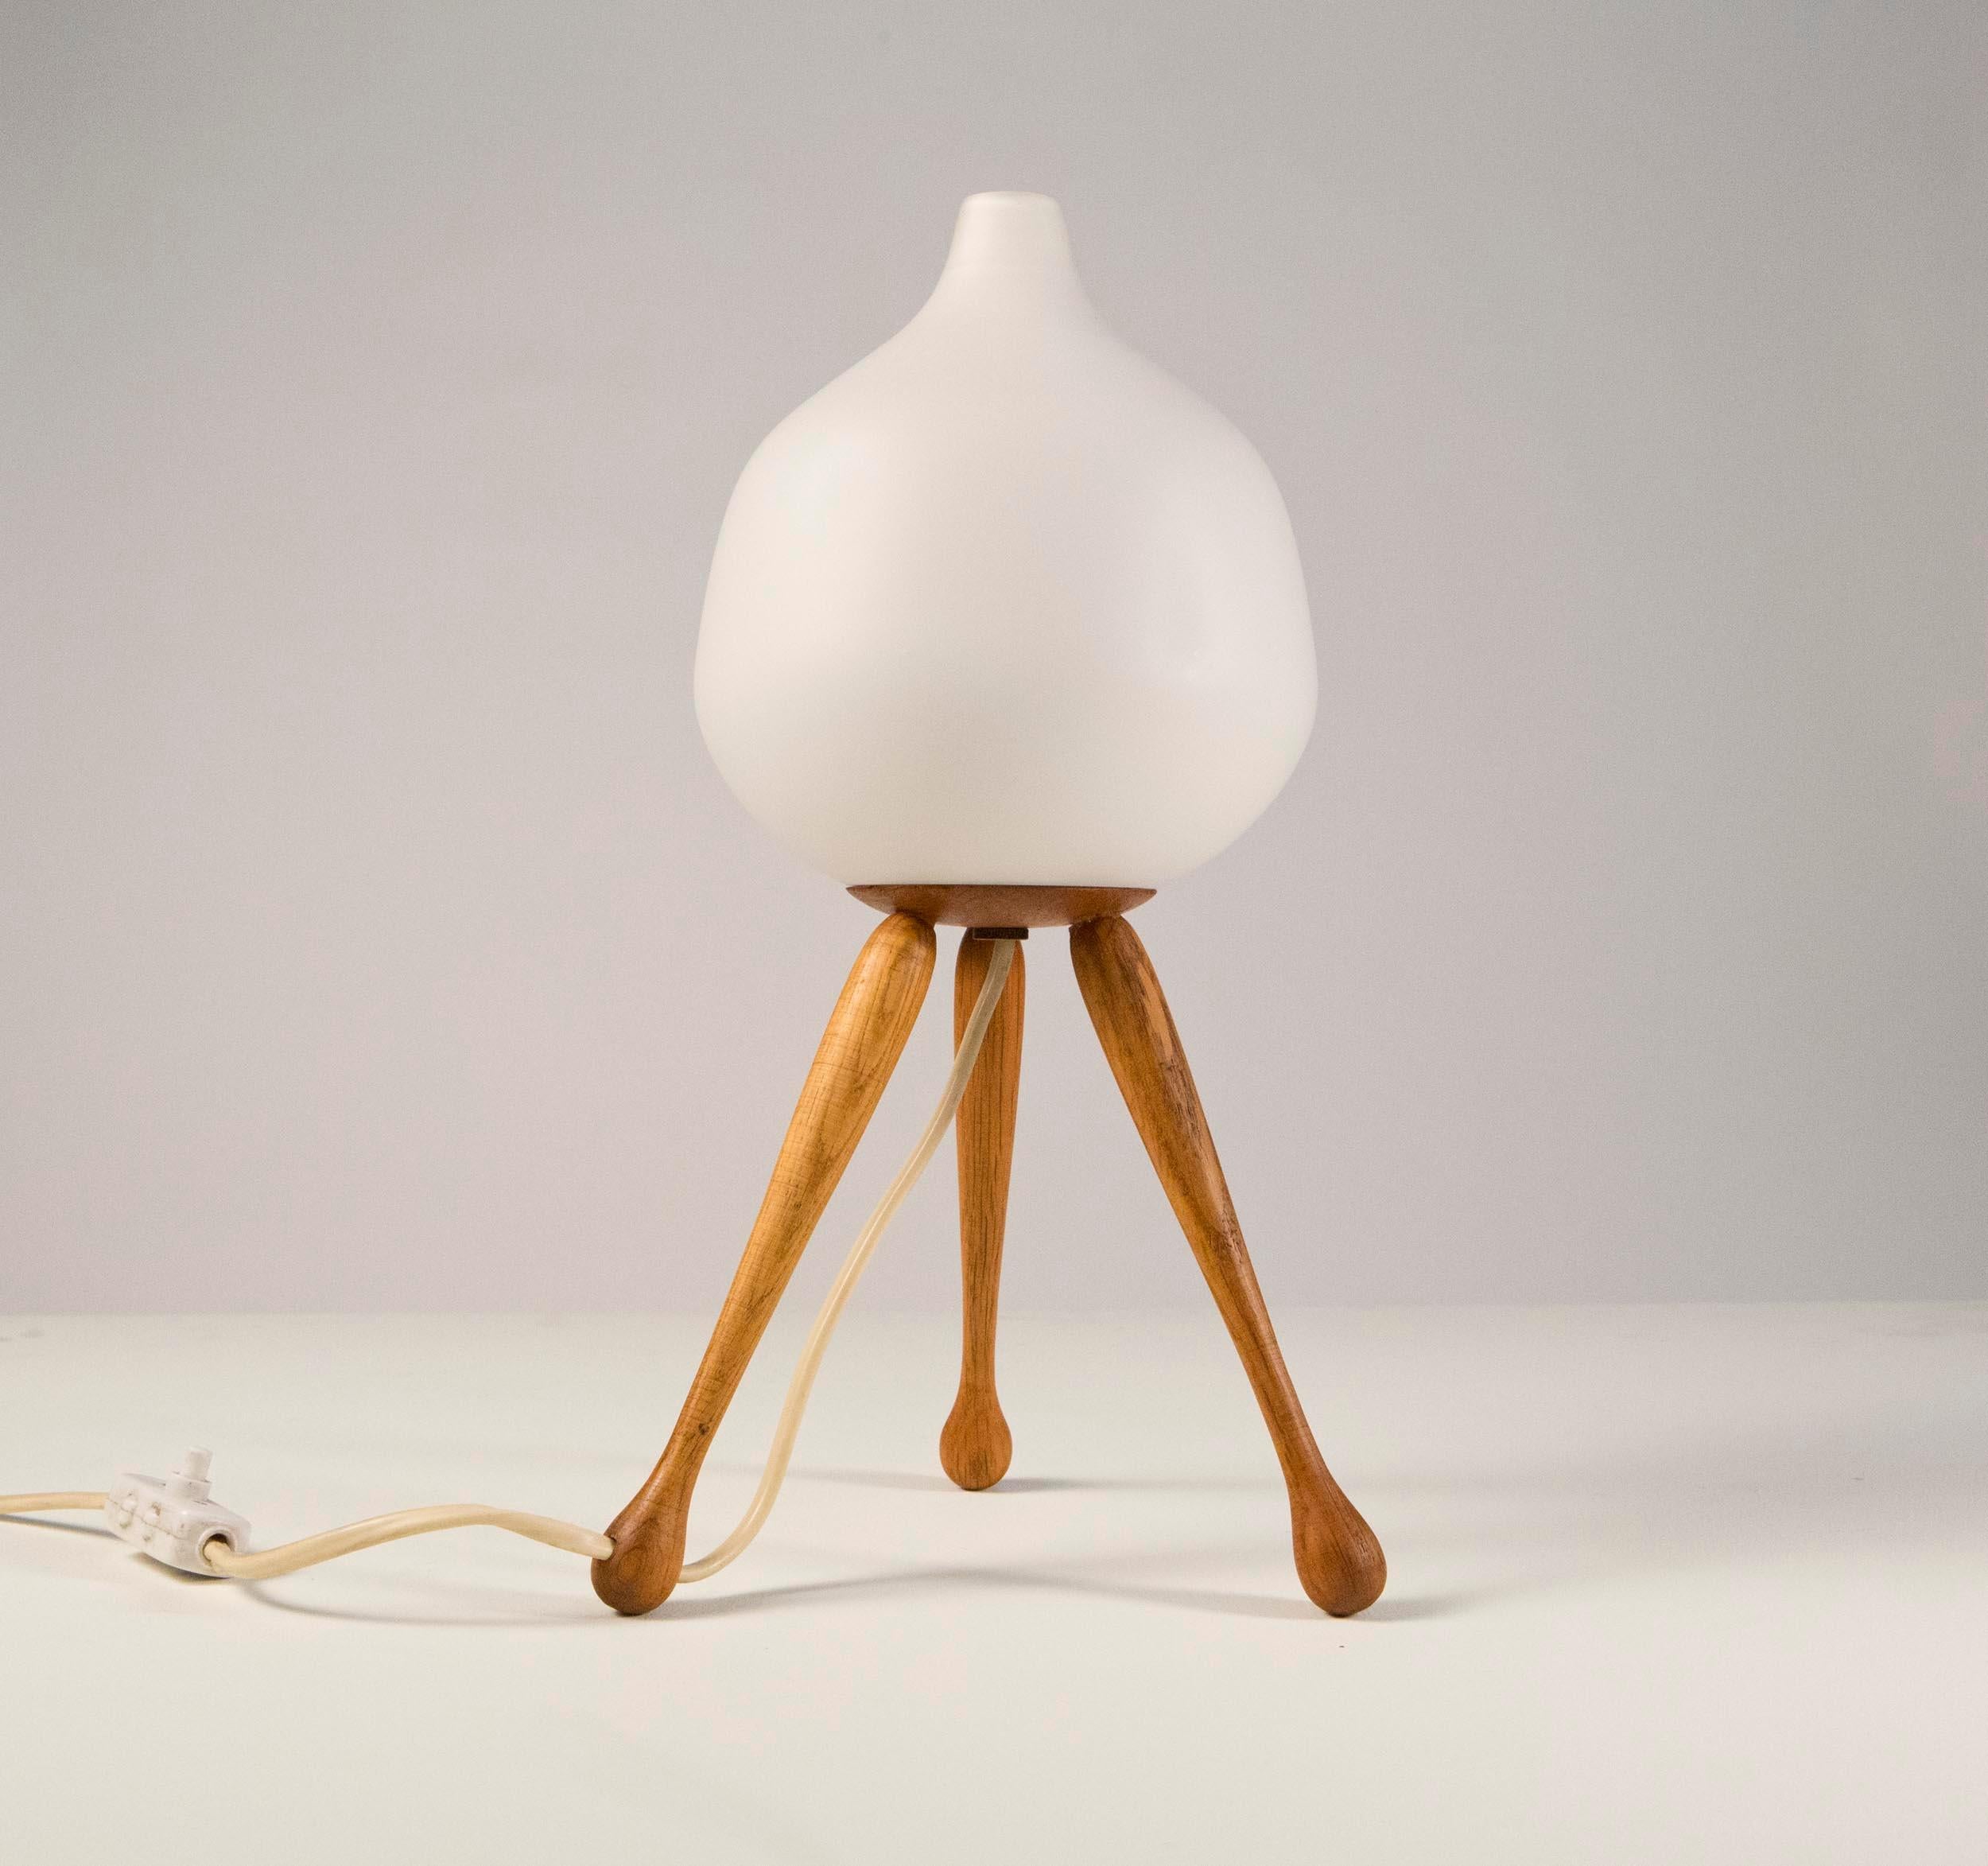 Uno & Östen Kristiansson Model 114 Oak Table Lamp by Luxus, Sweden 1950s

An early table lamp by Uno & Östen Kristiansson for Luxus. This lamp features a tripod base in oak with an opaline glass shade on top. Very minimalistic and great